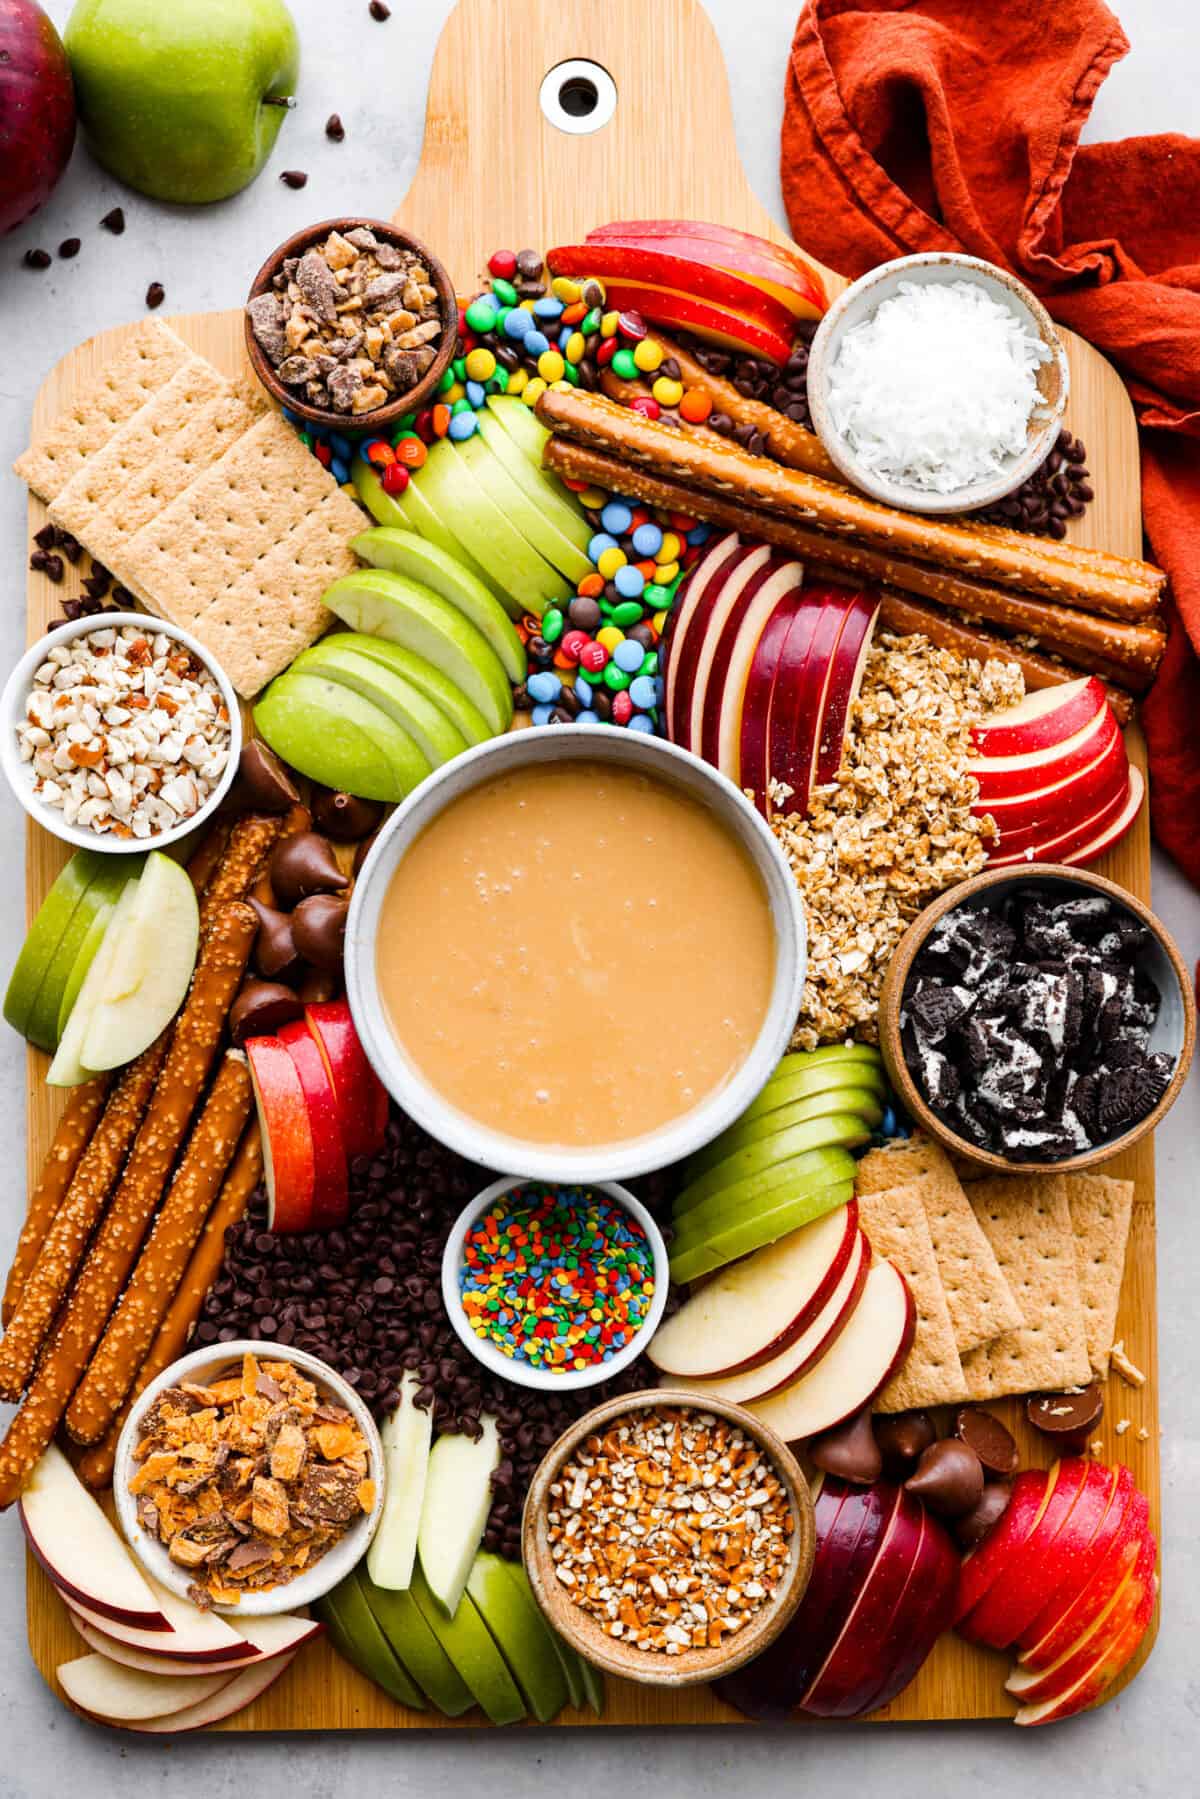 Top-down view of a whole caramel apple charcuterie board, filled with various cookies, candy, pretzels, crackers, and apple slices.